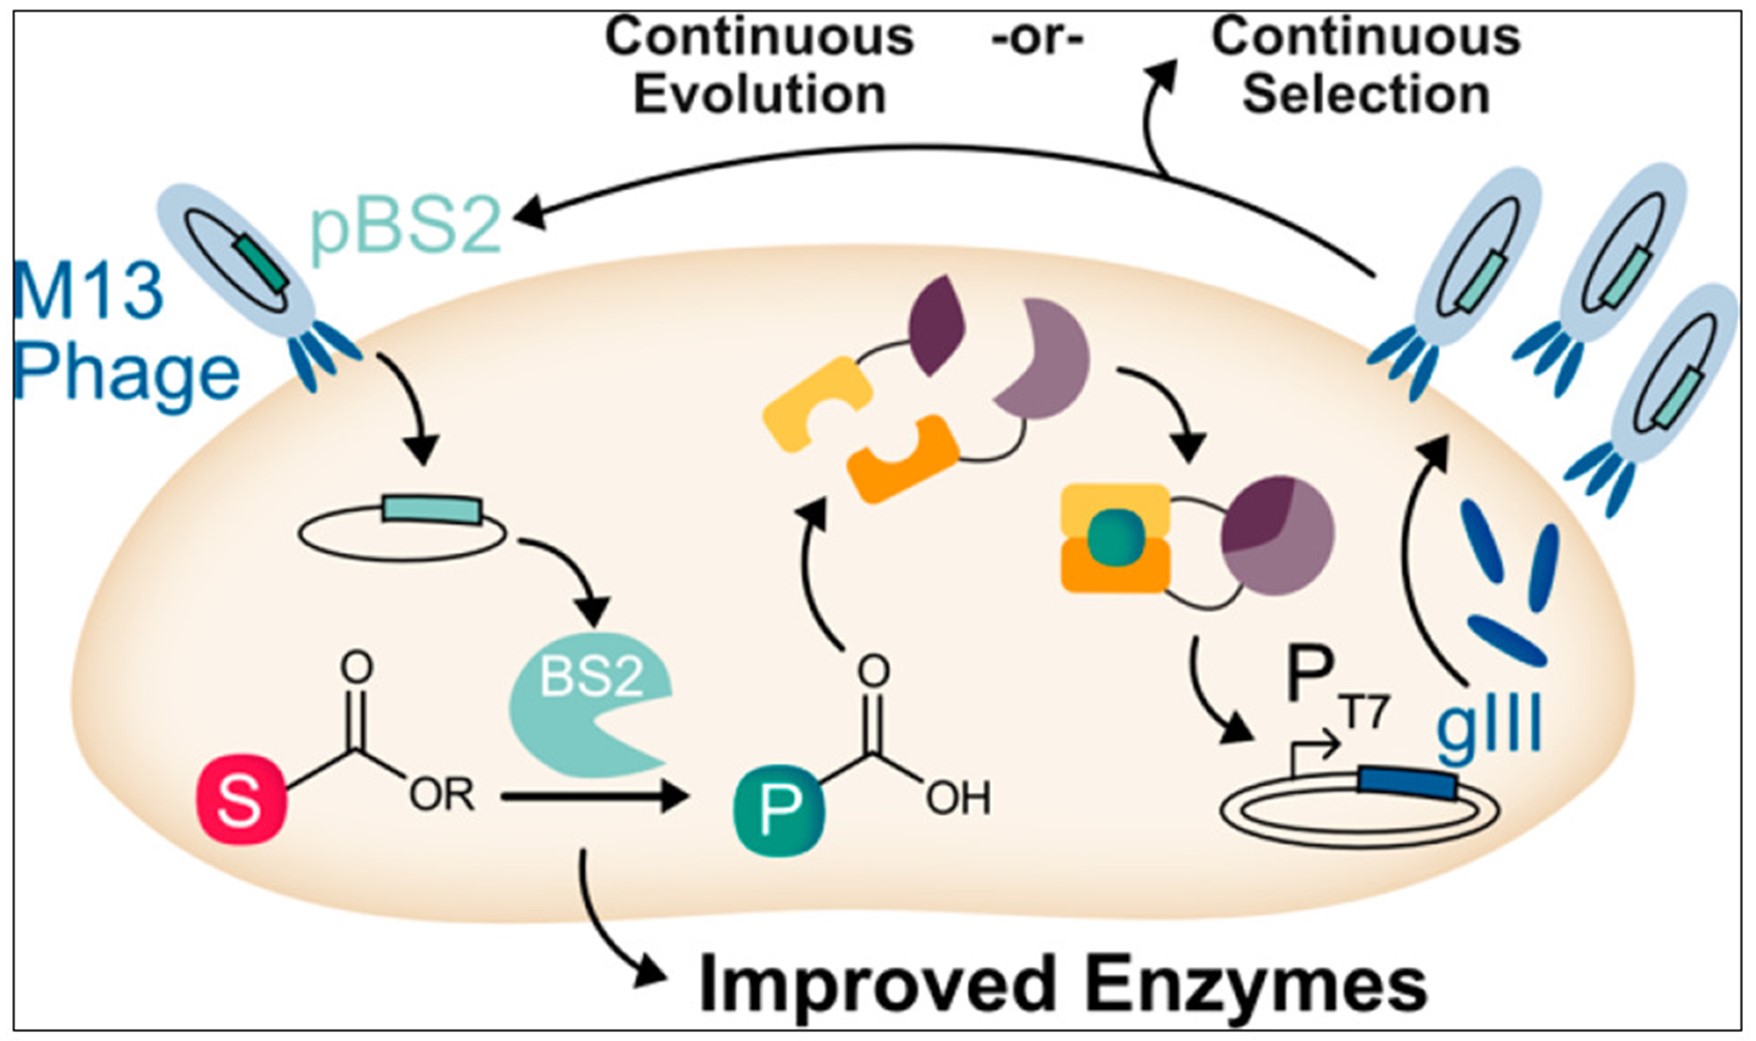 Fig. 1 Improvement of enzymes using phage-based continuous evolution and selection technologies to engineer enzymes.